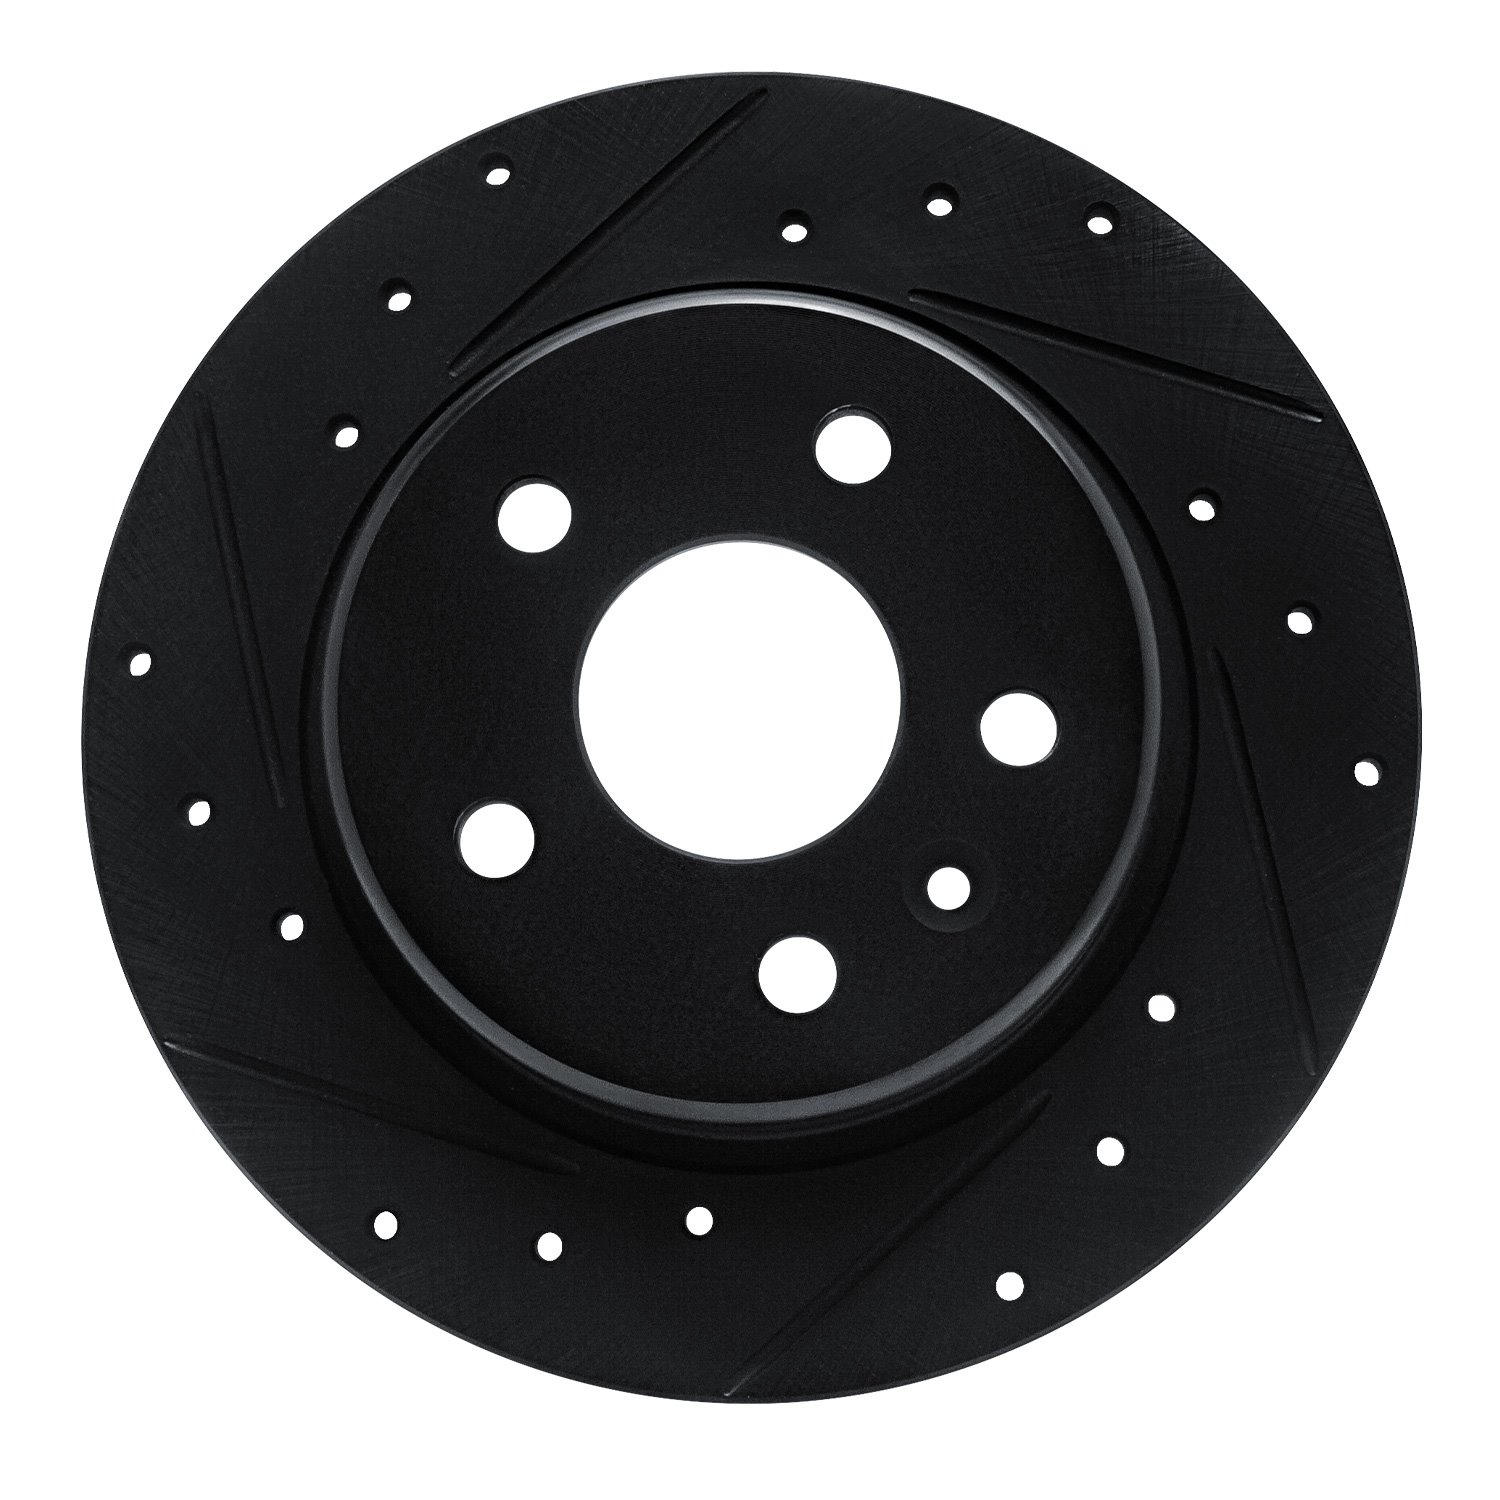 E-Line Drilled & Slotted Black Brake Rotor, Fits Select GM, Position: Rear Left